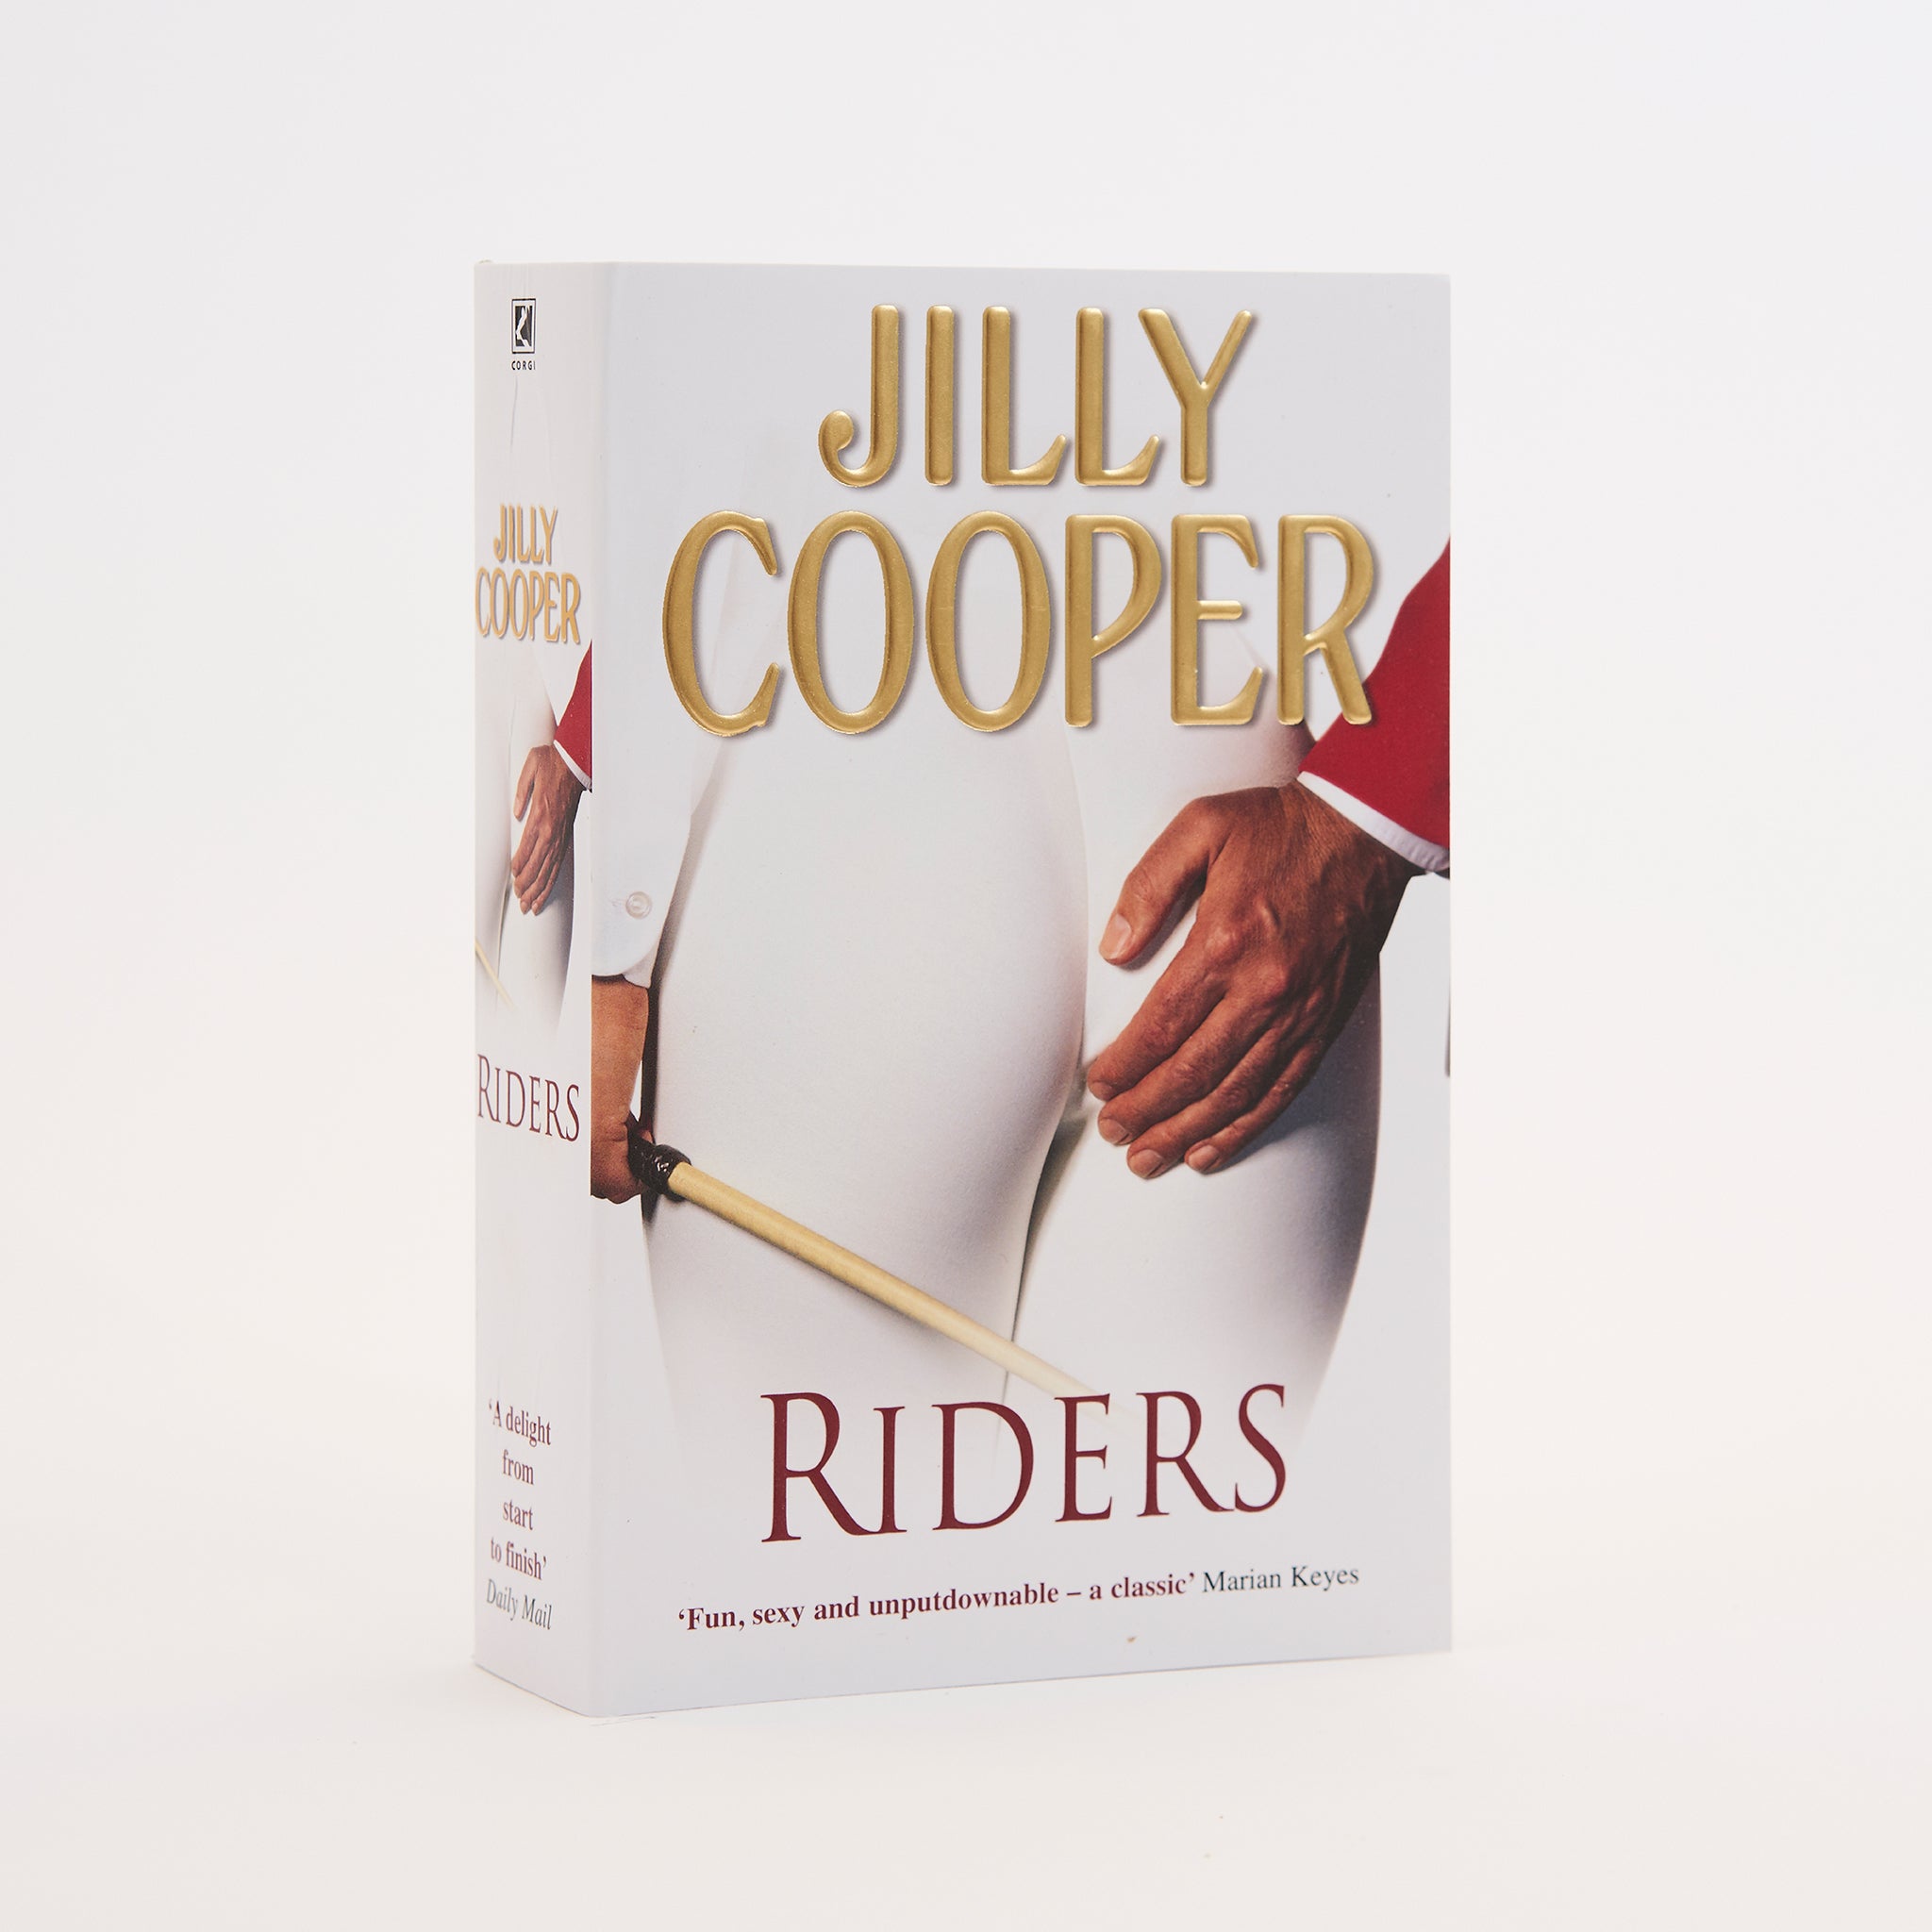 Riders by Julie Cooper